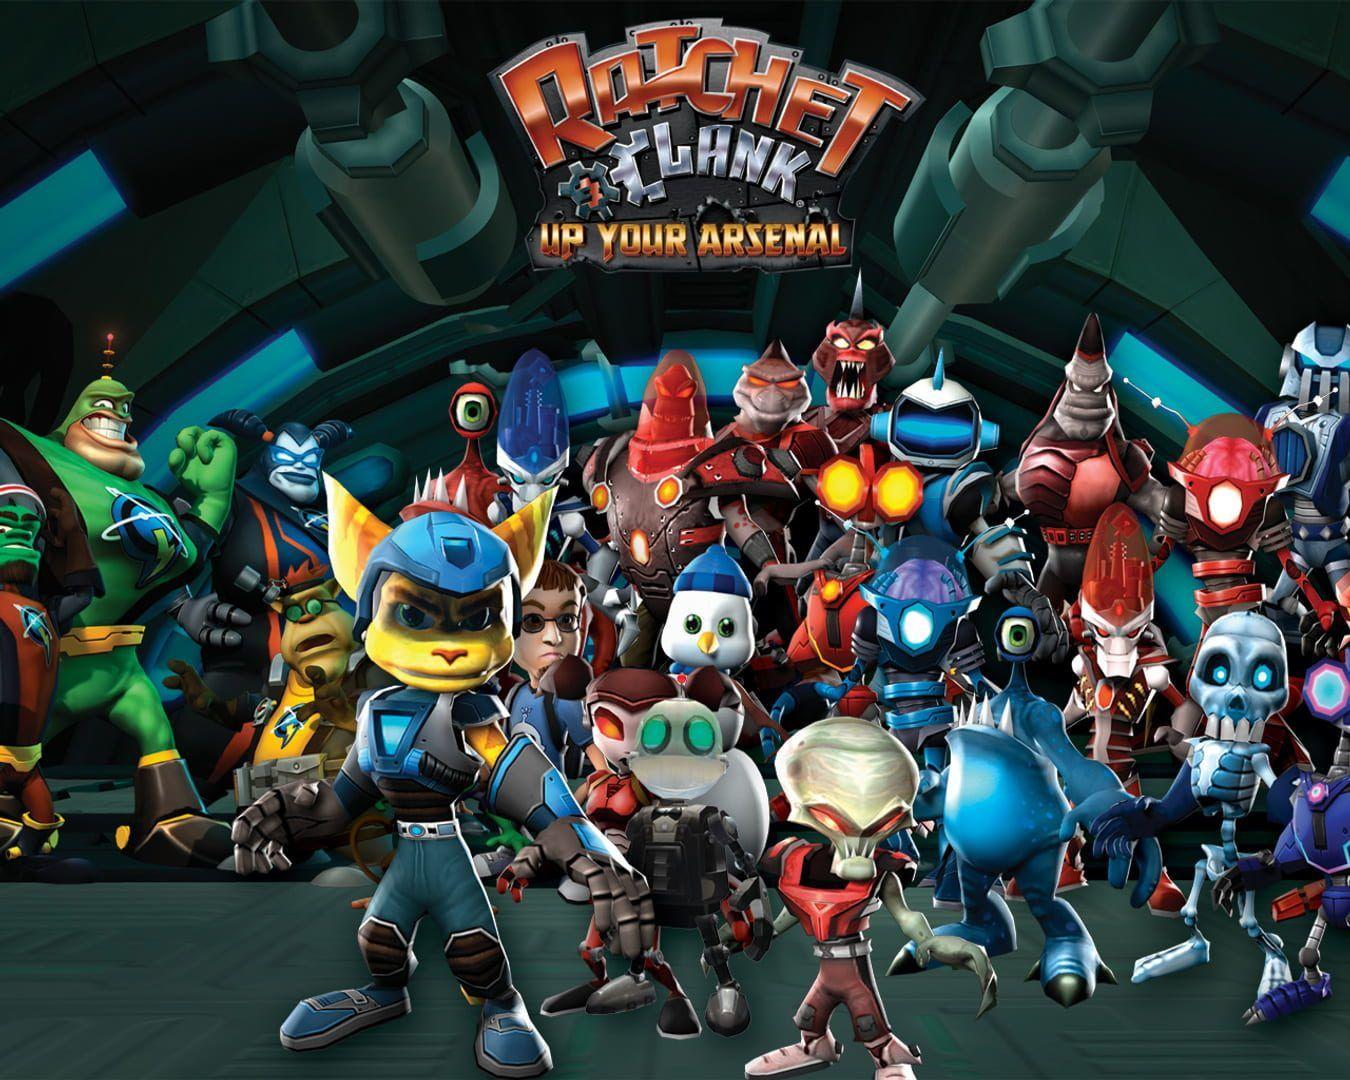 Ratchet & Clank: Up Your Arsenal Wallpaper